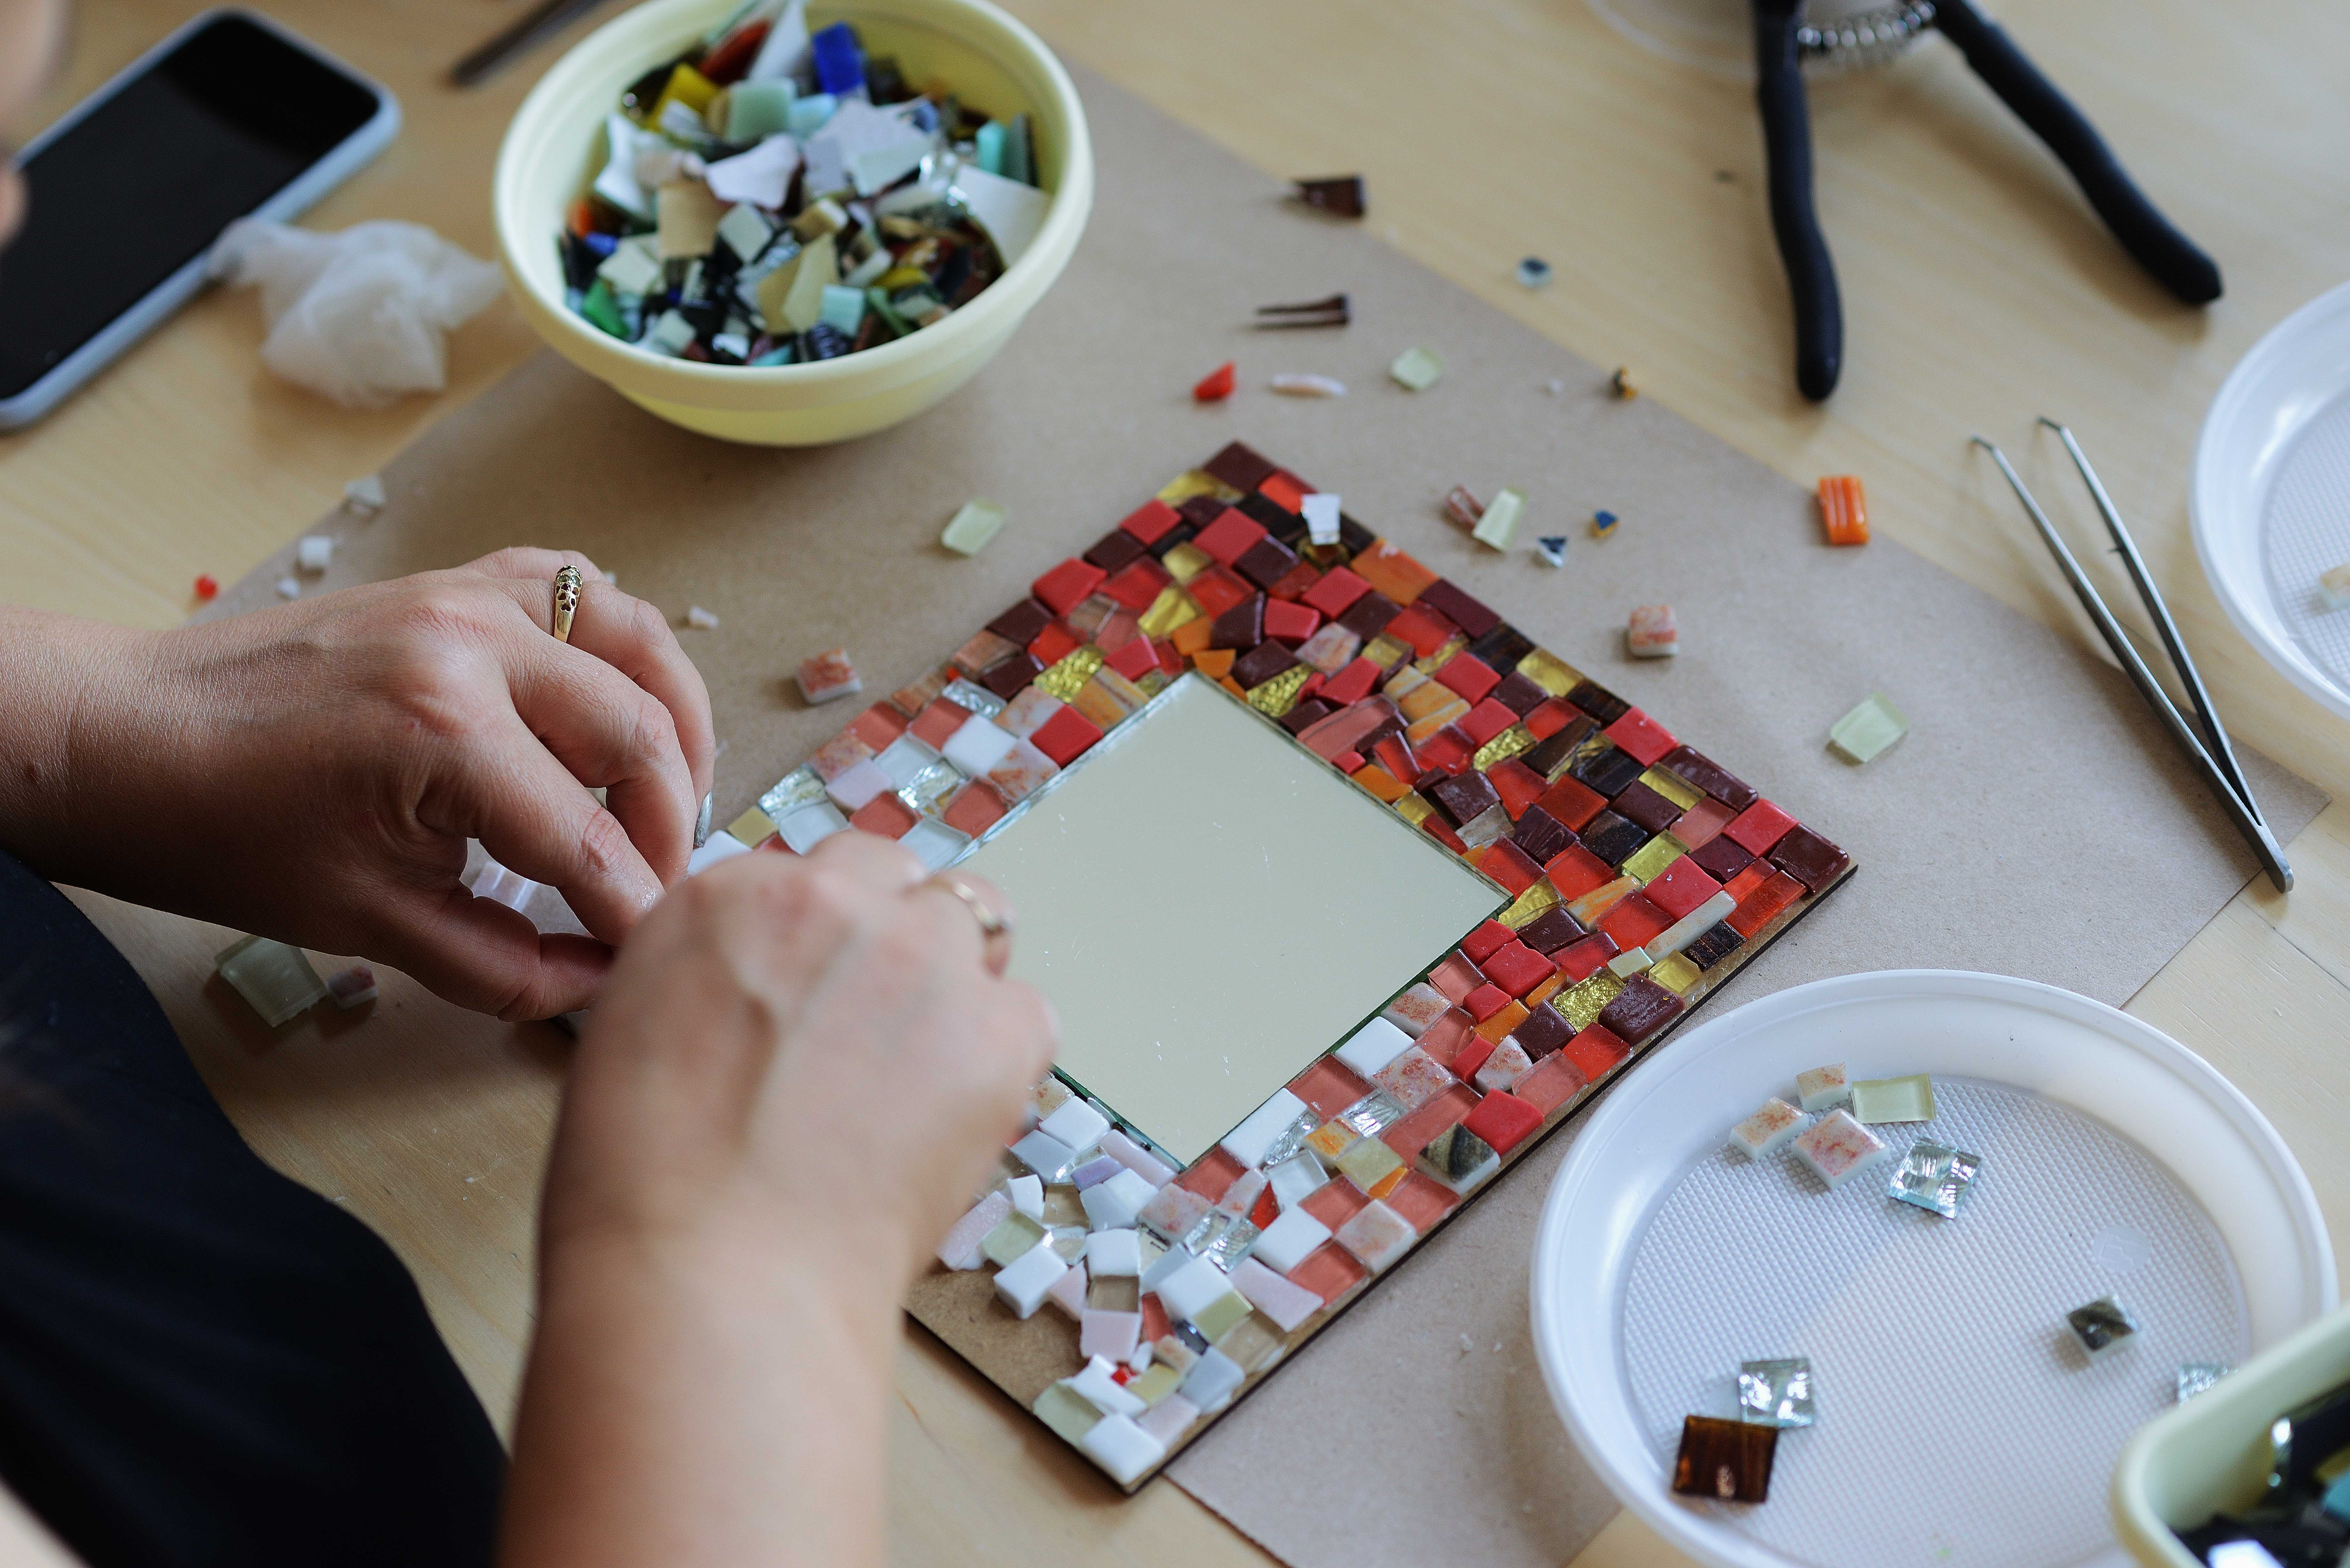 Persons hands creating a small rectangular mosaic mirror frame. The mosiac tiles are small and square in shades of red, orange, yellow and white.